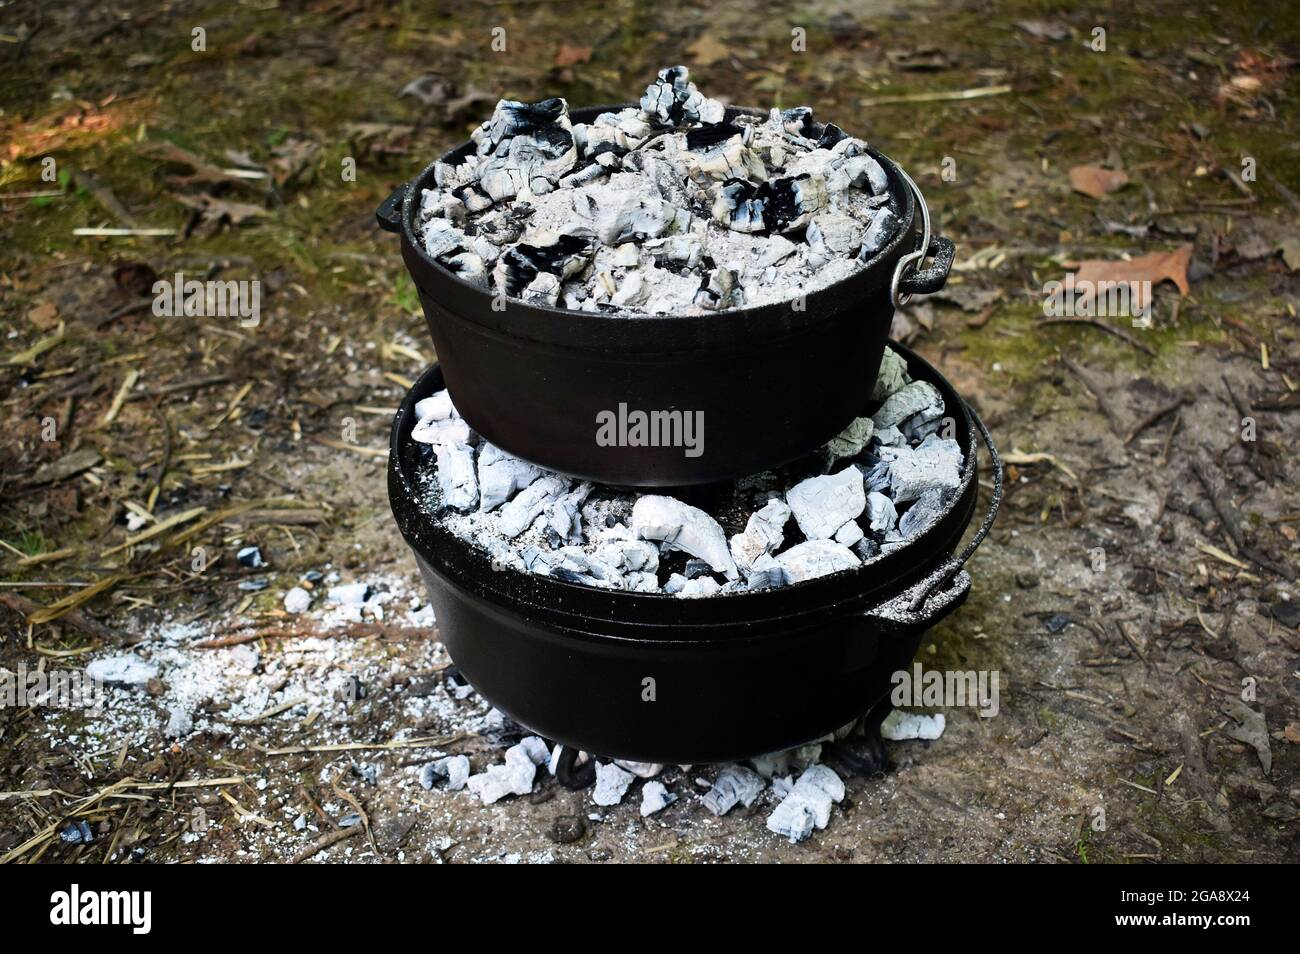 Two cast iron dutch ovens stacked on top of each other baking. They are covered in charcoal. Stock Photo